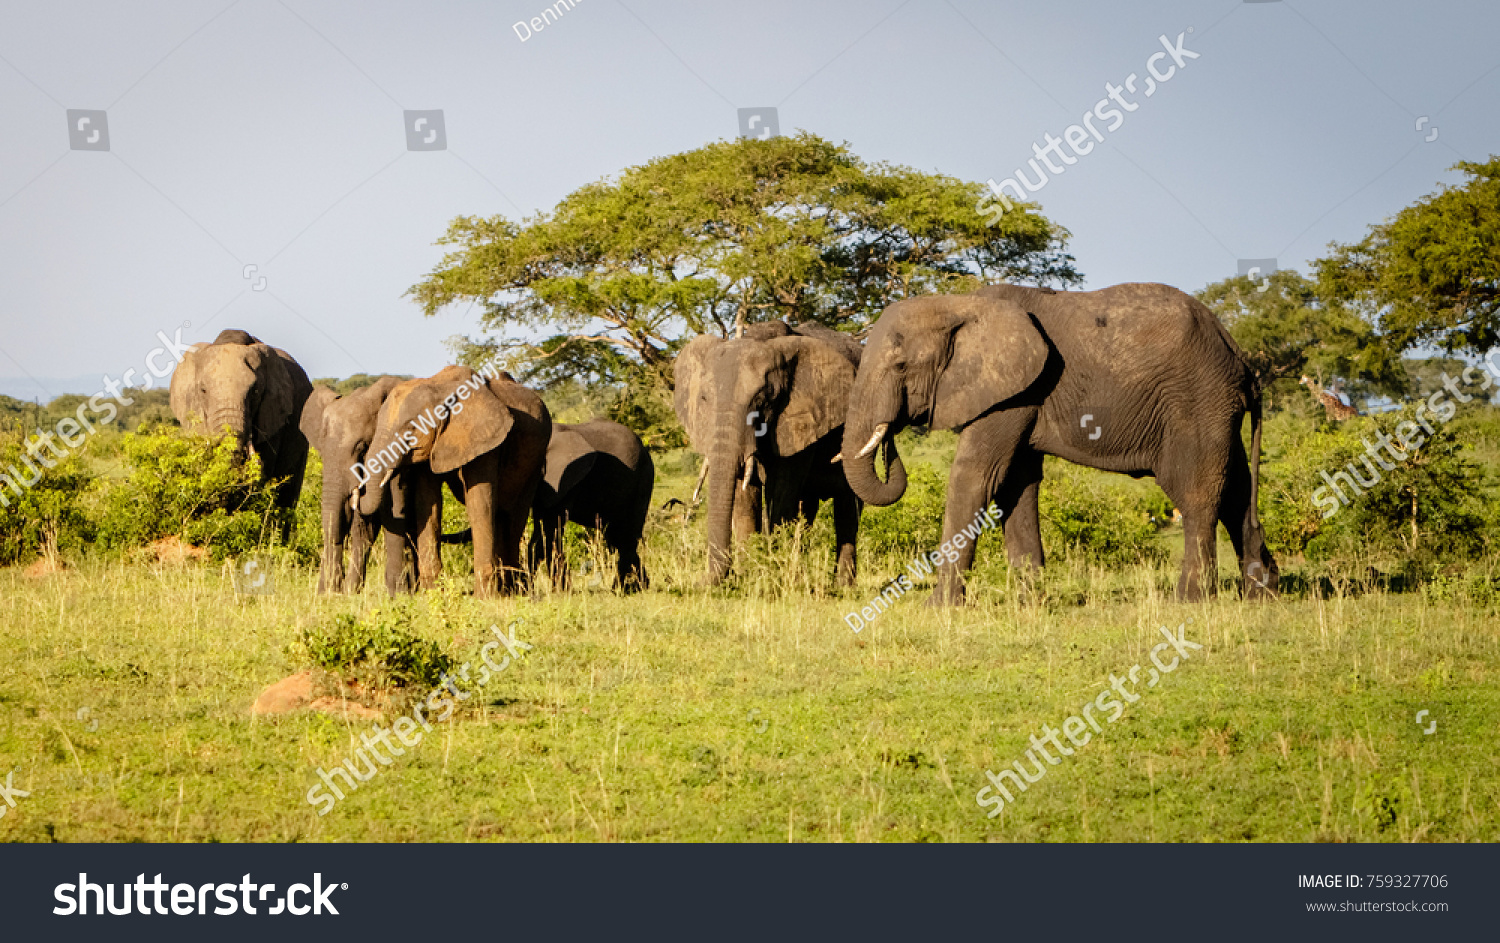 A group of elephants enjoying the sunset warmth in Murchison Falls national park in Uganda nearby lake Albert. Unbelievable that oil drilling will take place nearby to destroy the nature. #759327706